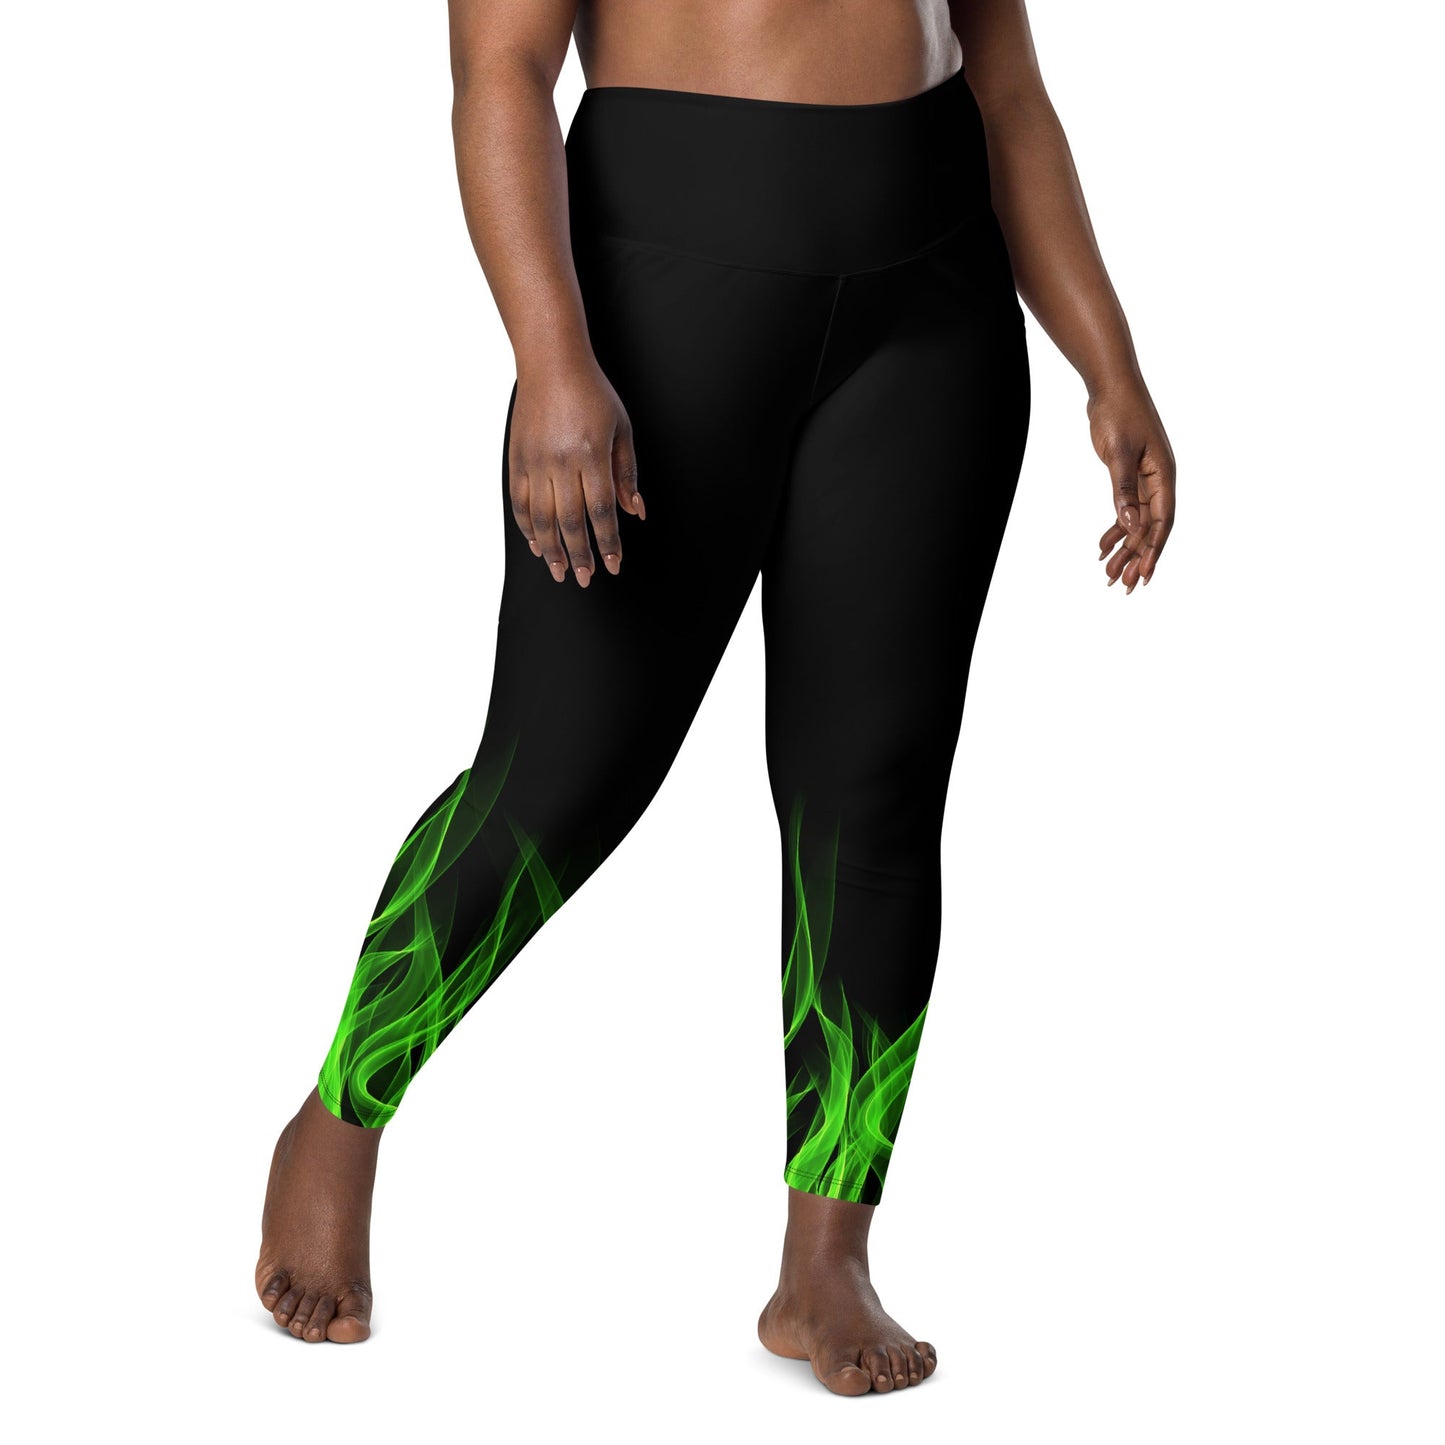 Green Flame Leggings with pockets boundingcosplayWrong Lever Clothing